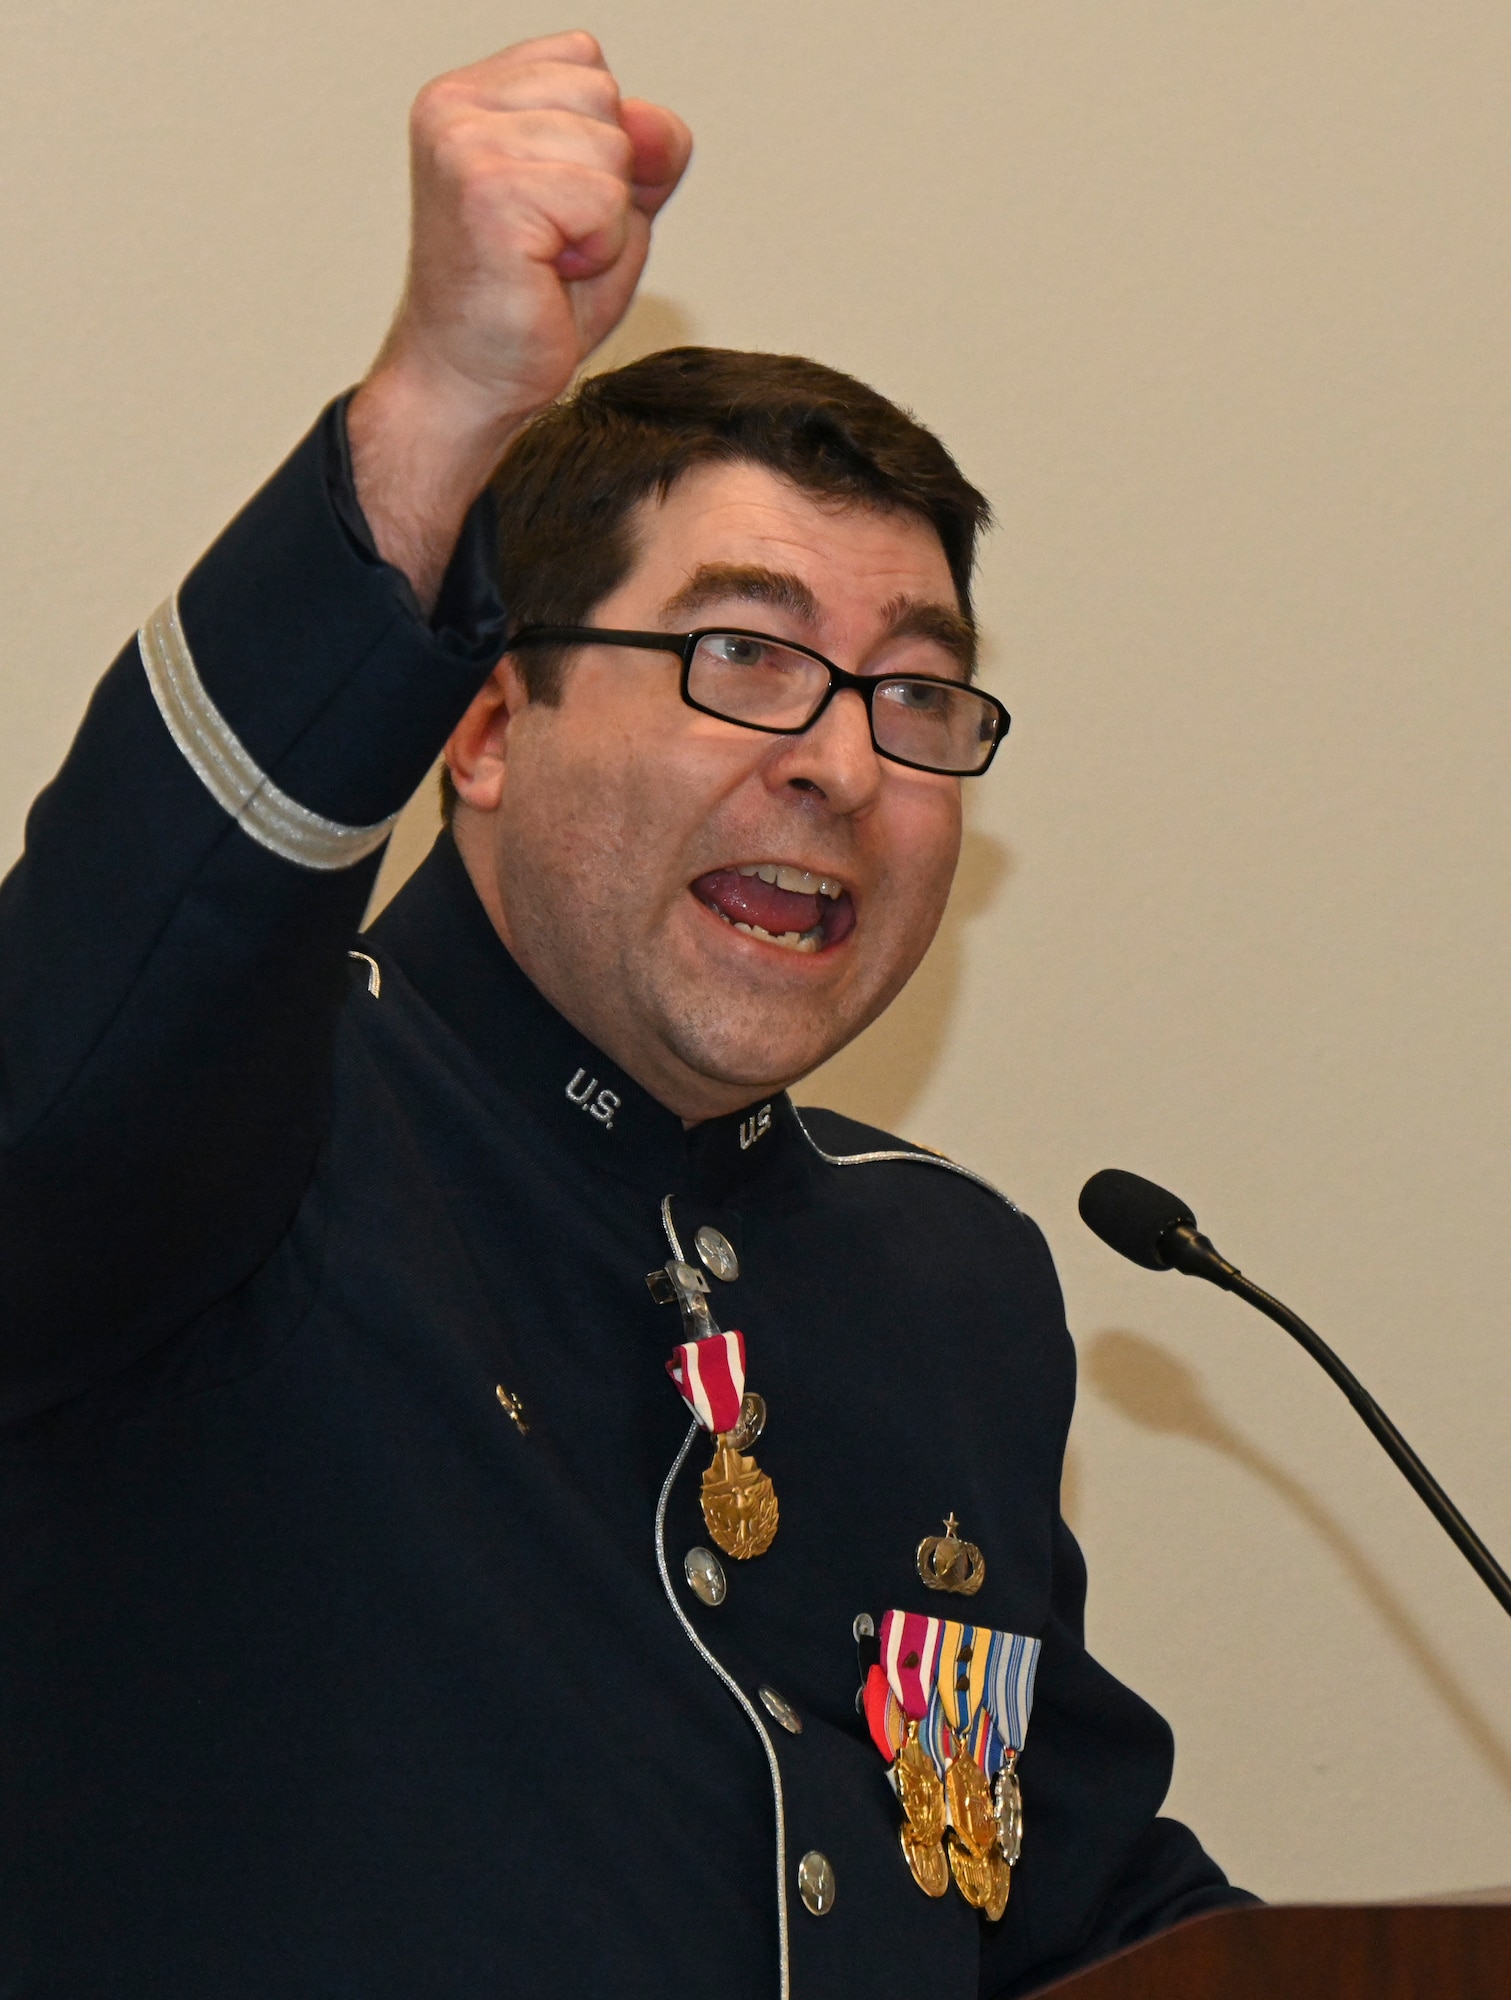 Air Force officer in a band uniform raises his hand in the air.